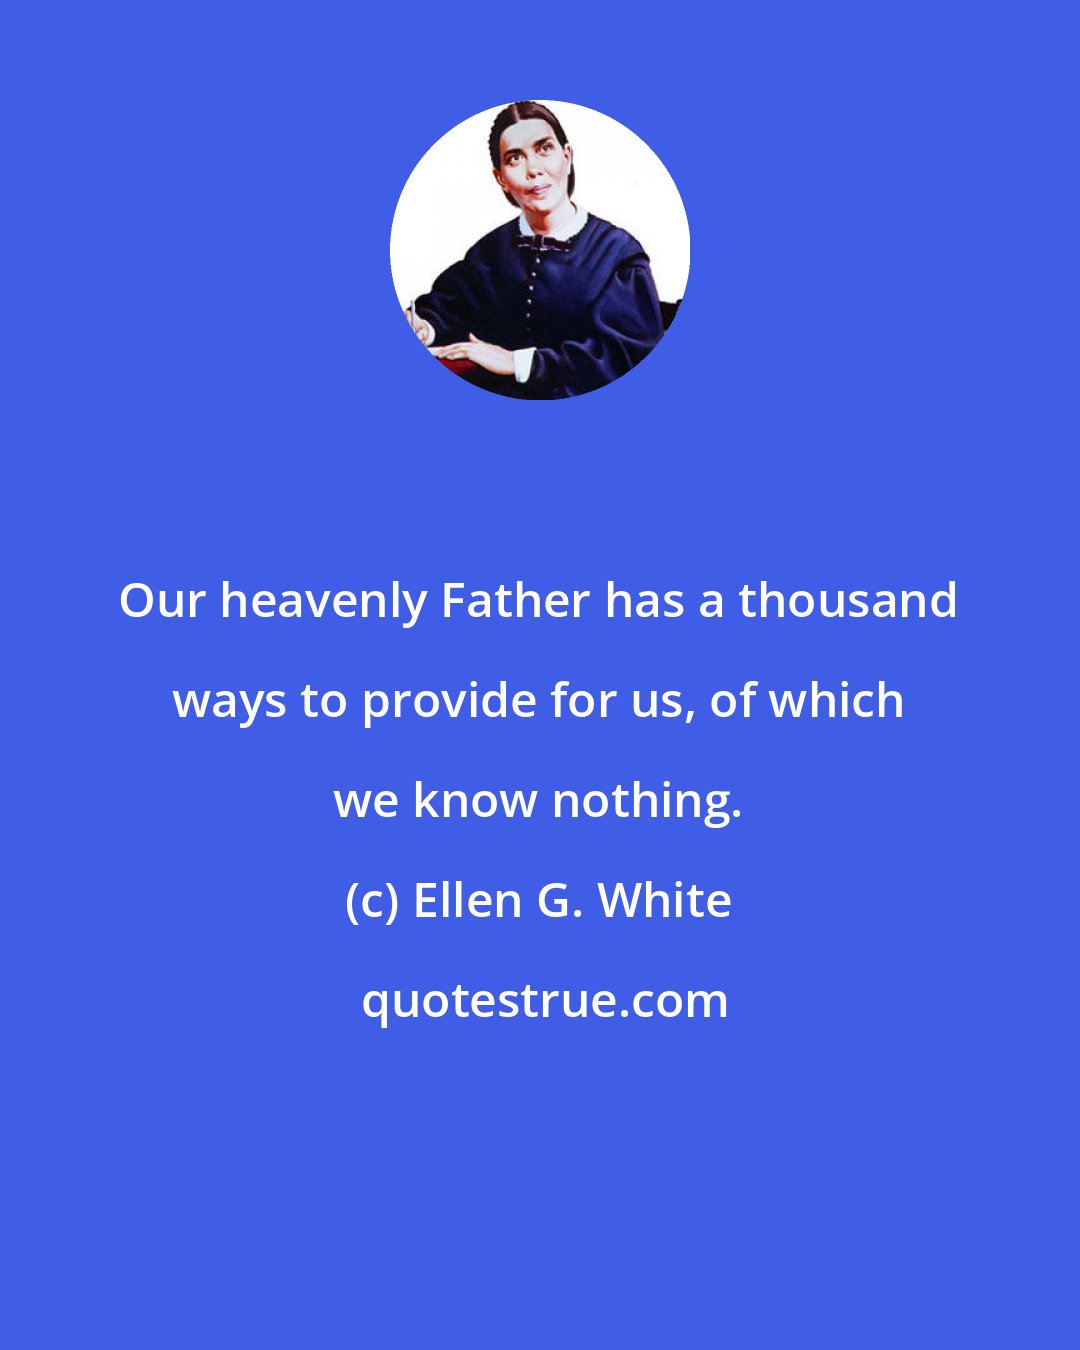 Ellen G. White: Our heavenly Father has a thousand ways to provide for us, of which we know nothing.